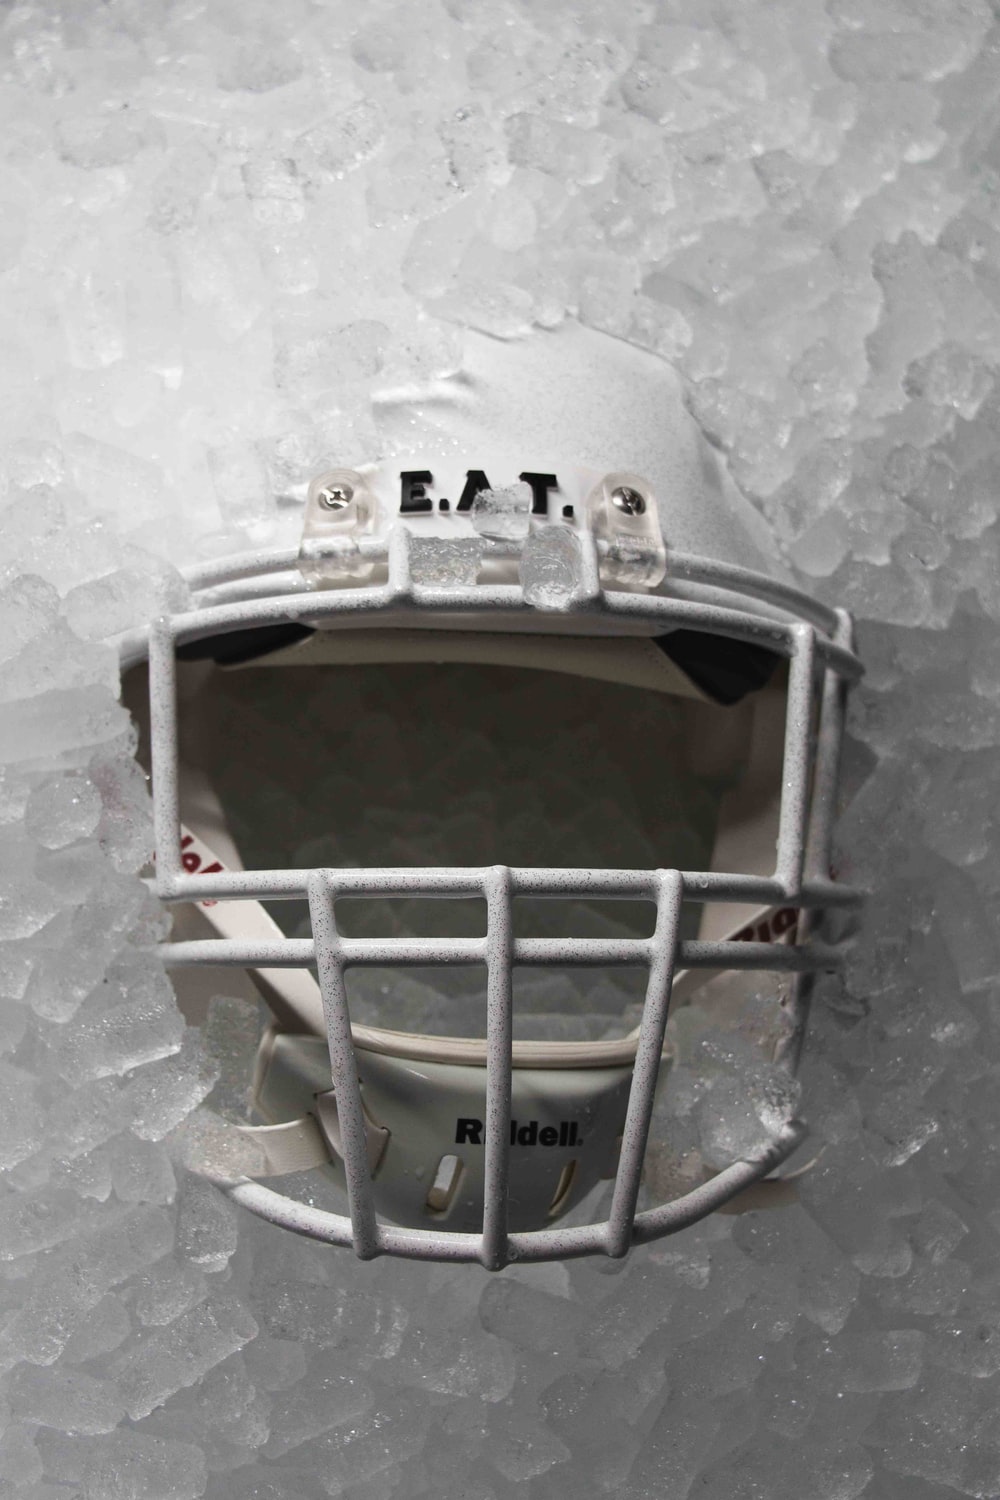 Football Helmet Picture. Download Free Image